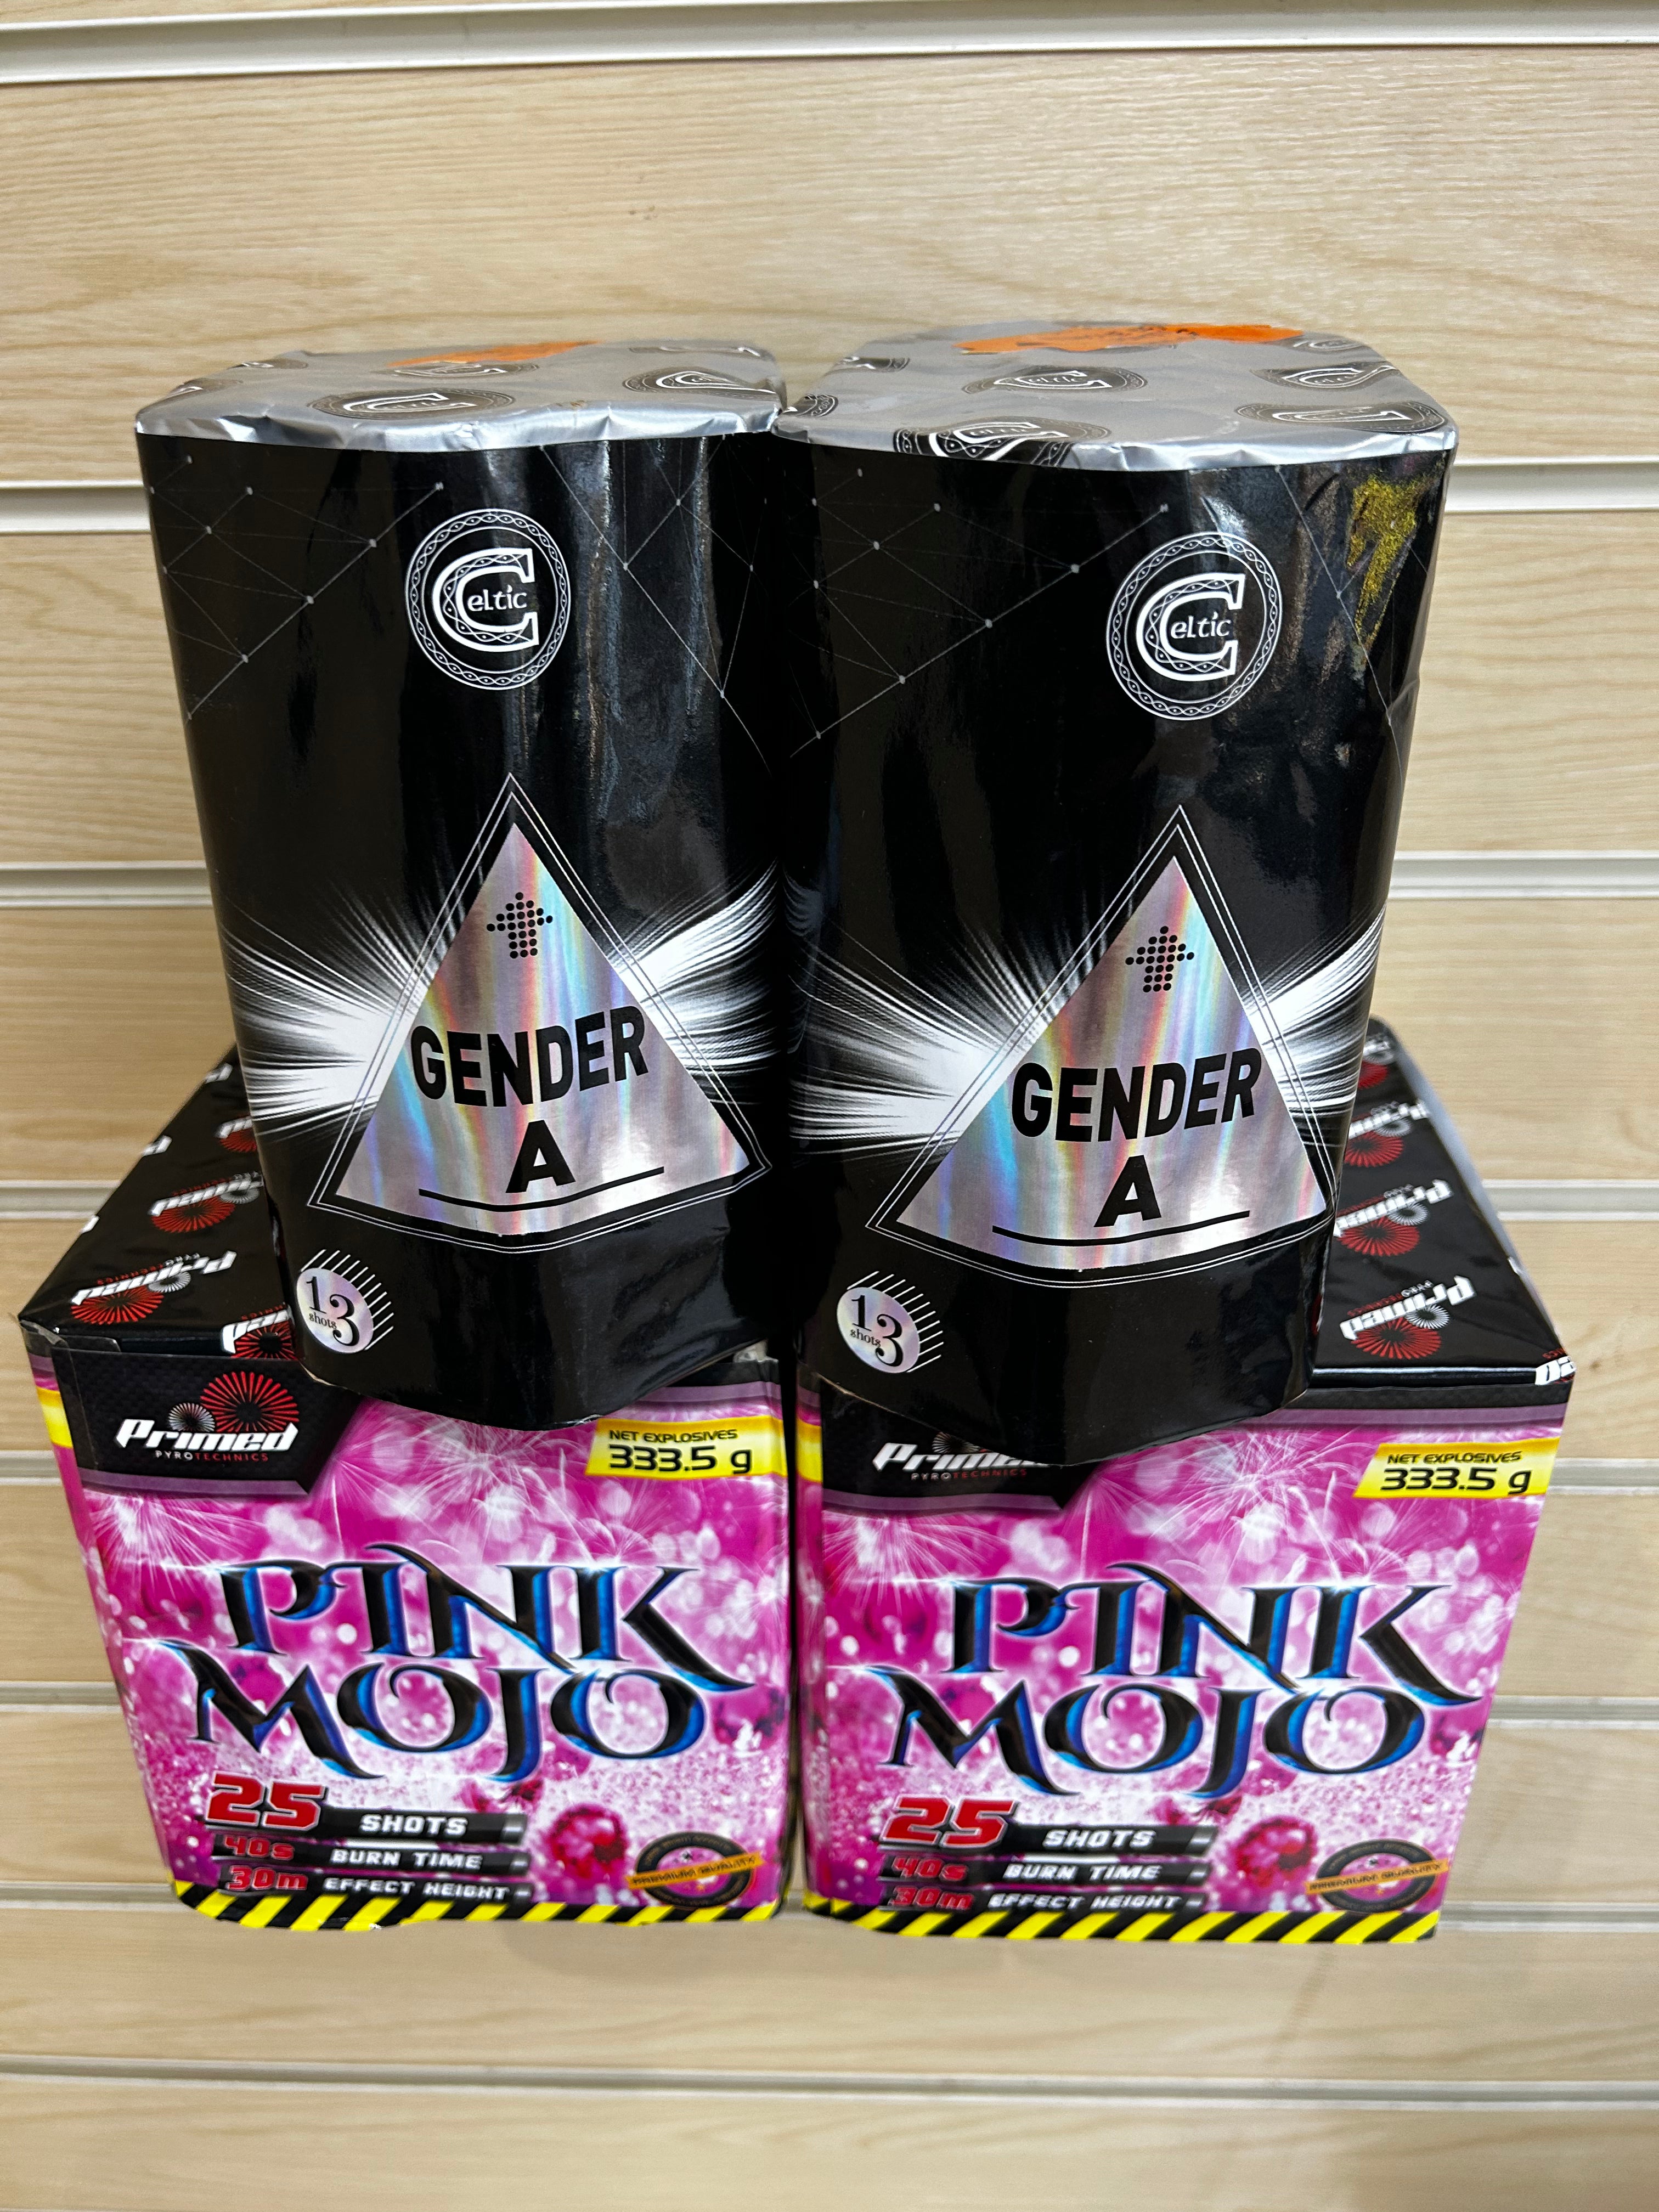 Girl Pink Gender Reveal Pack ( Buy This And Get One Of The Gender As FREE ) WOW !!!